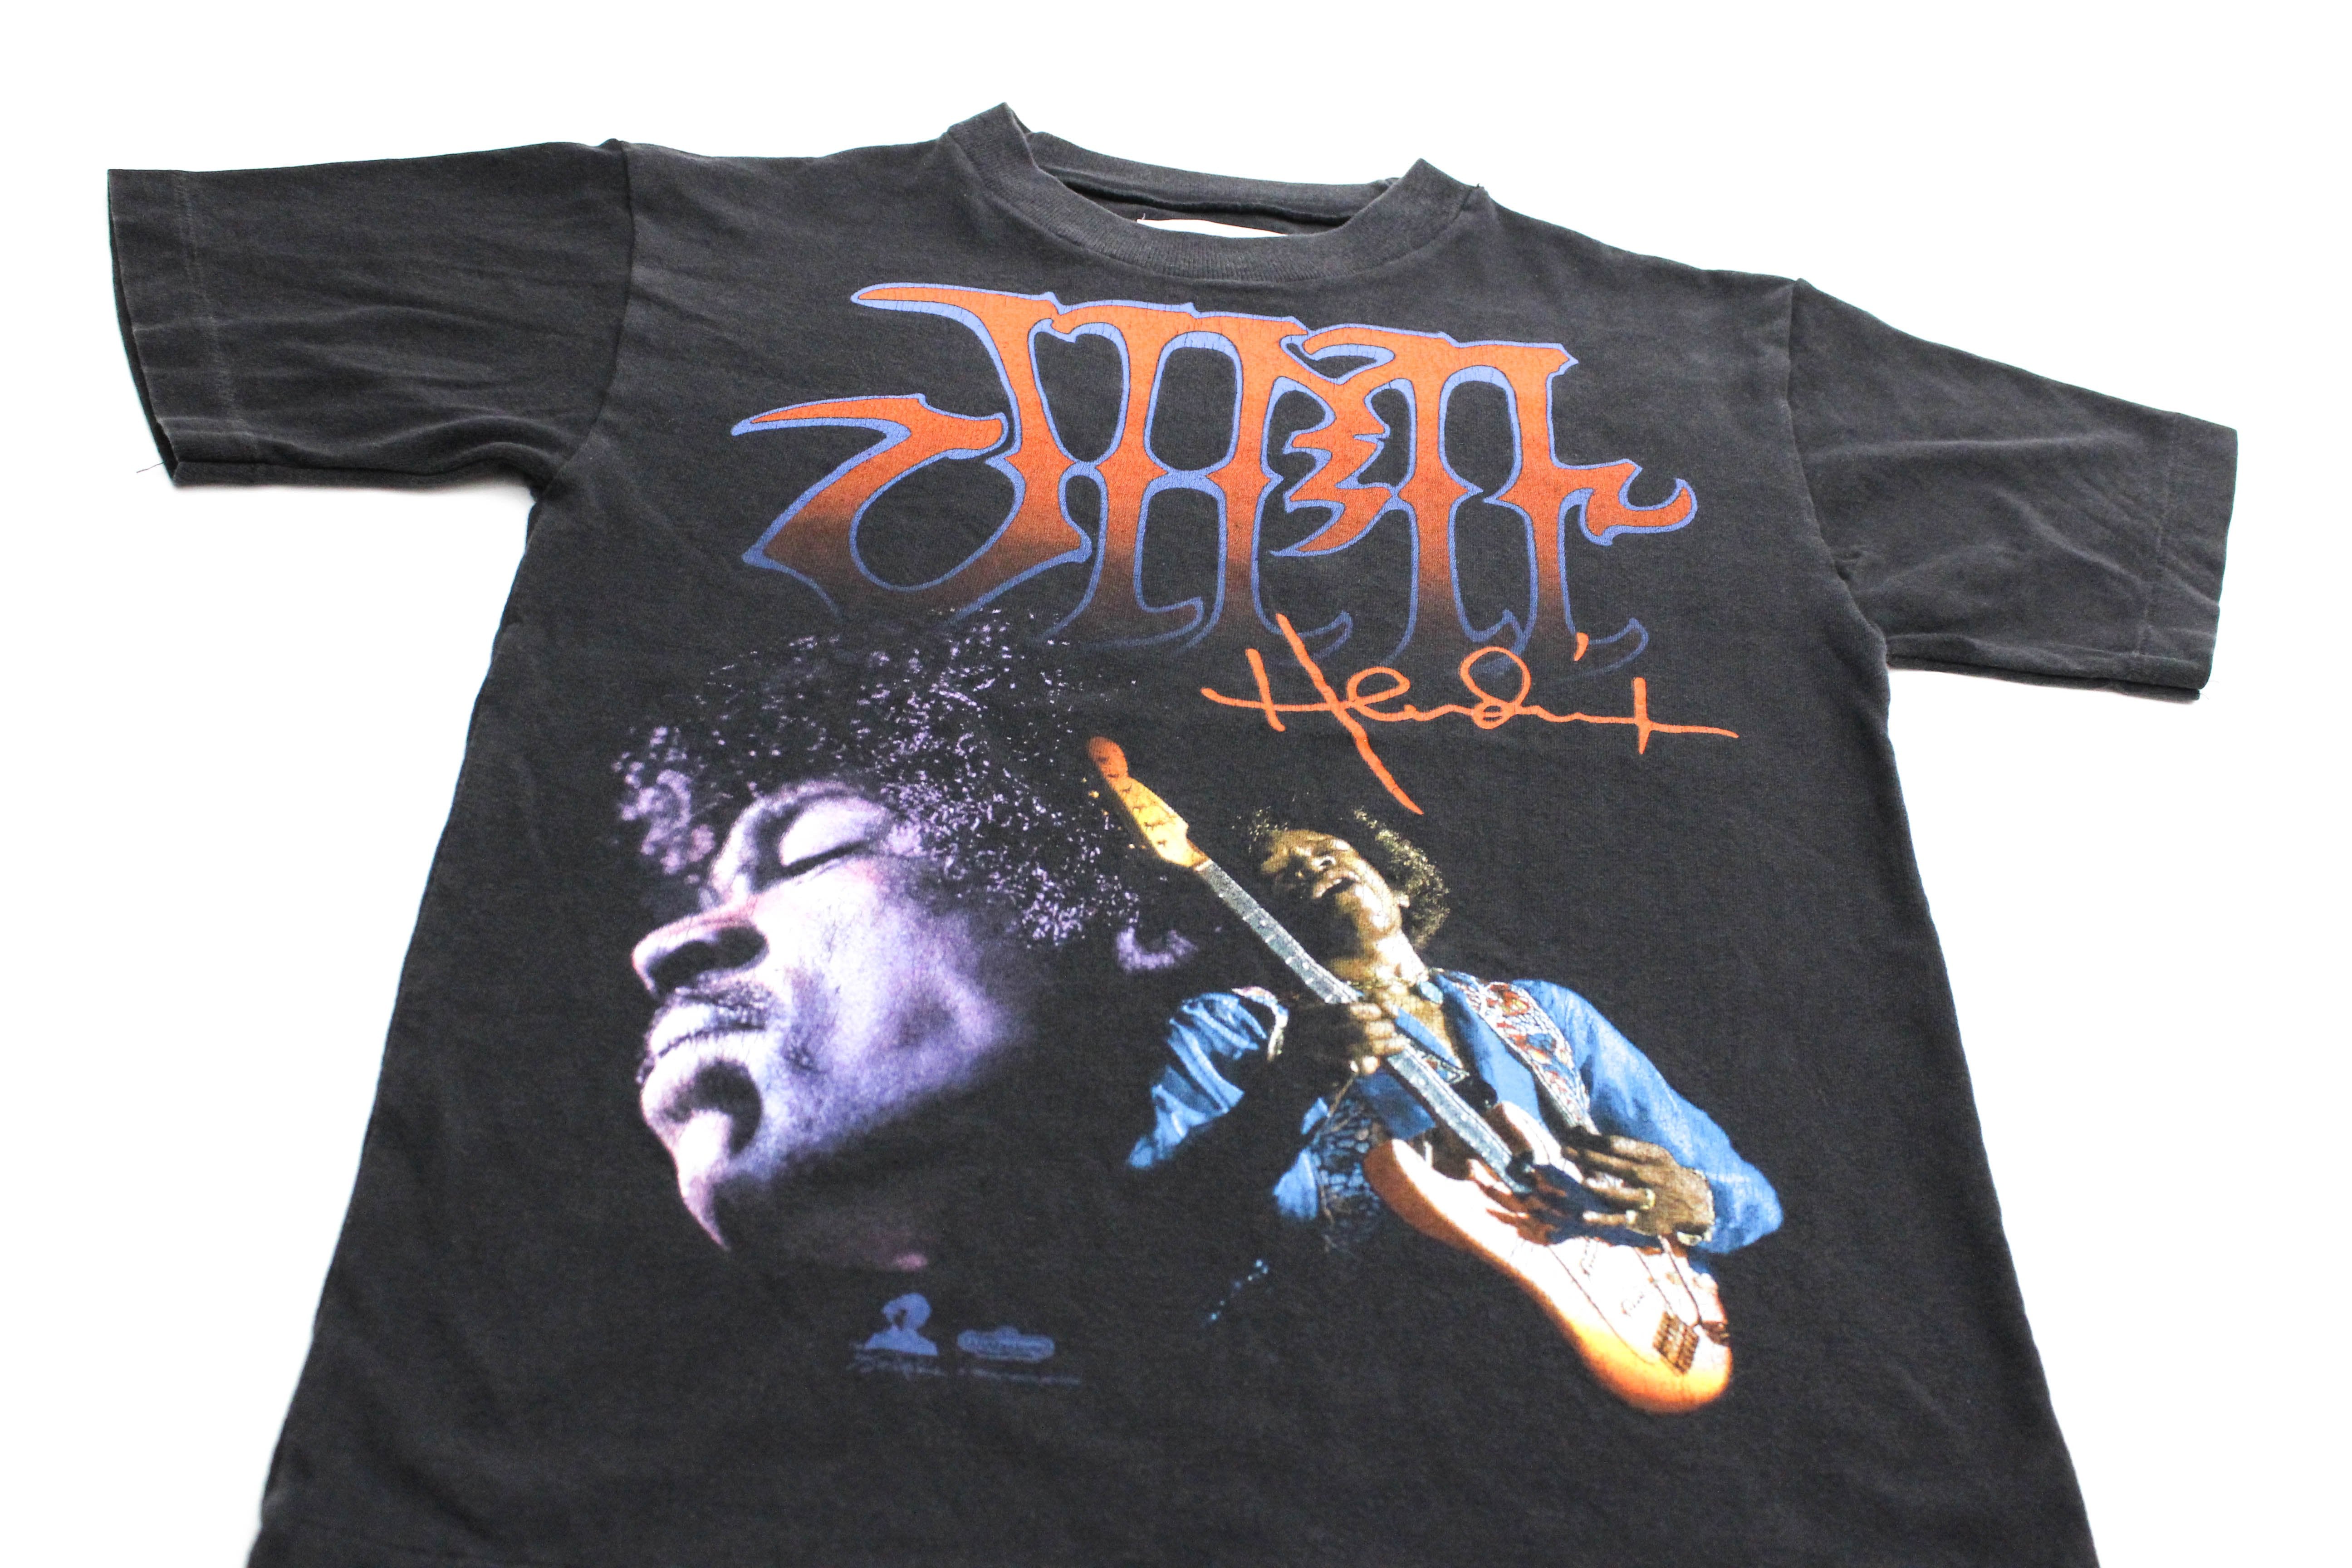 Jimi Hendrix Reworked '96  Tribute Youth XS/S *1 of 1*